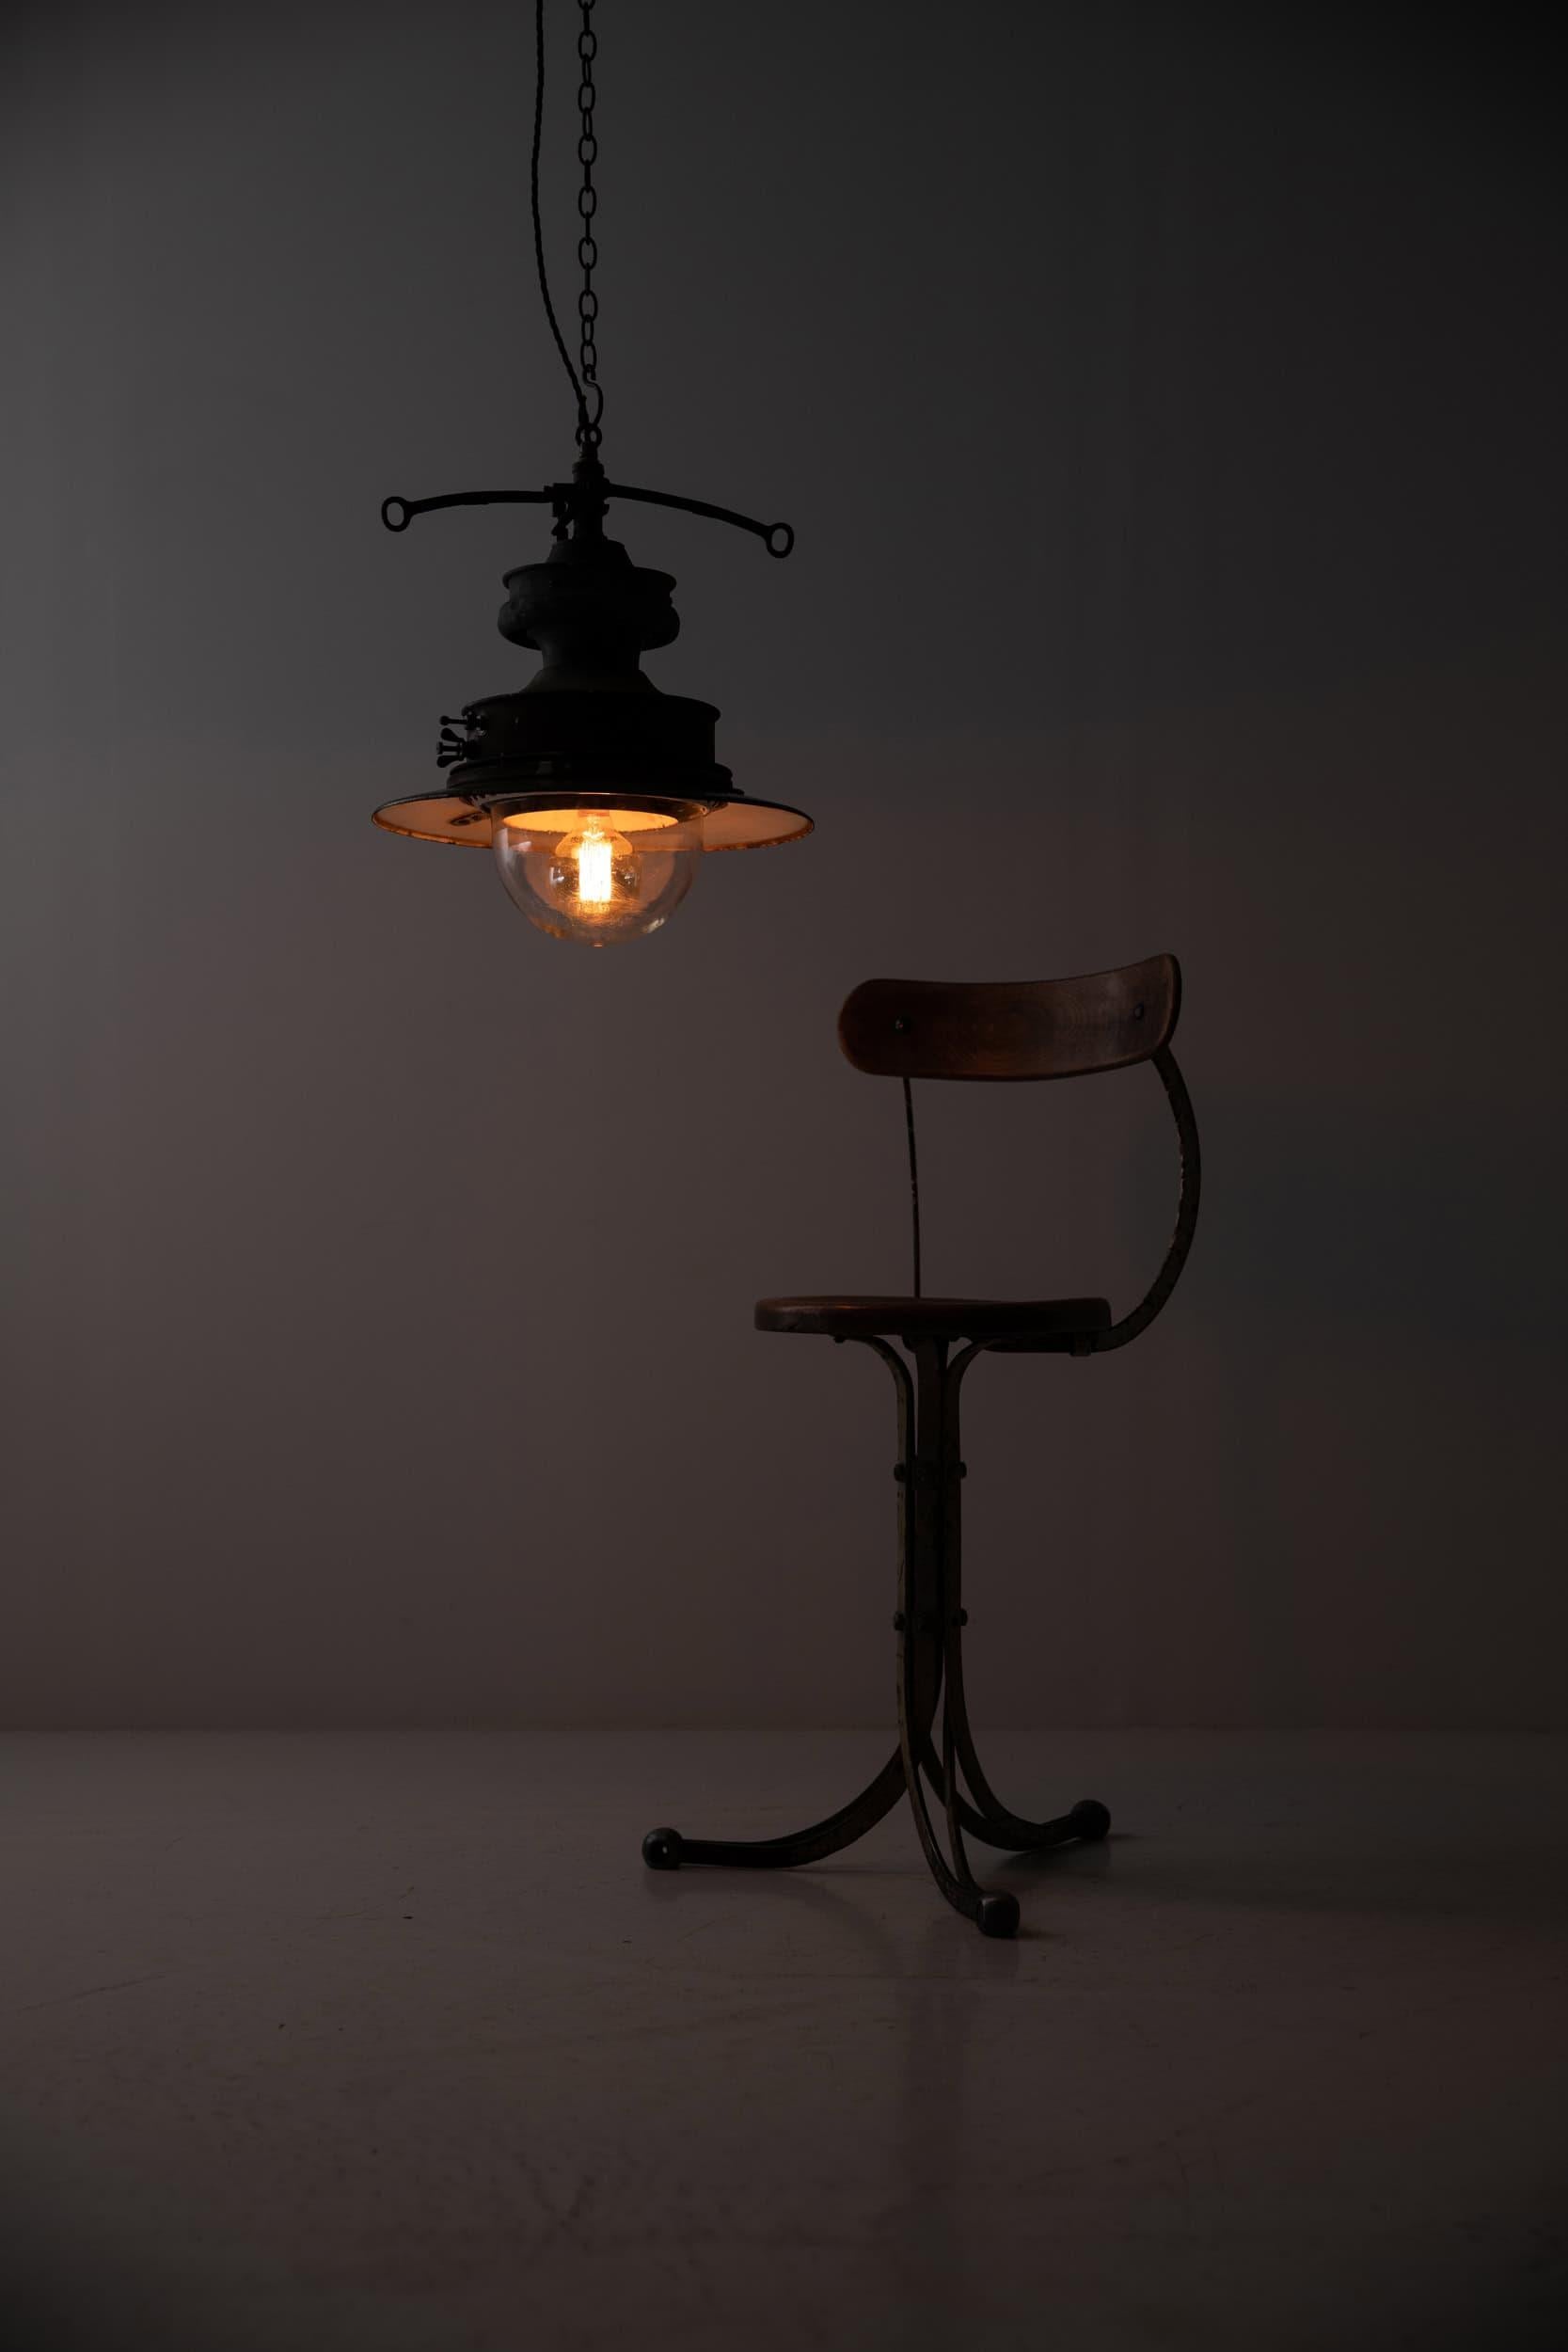 

A beautiful English Victorian copper railway pendant light. c.1890

A former gas lamp often used on railway platforms from the late 19th/early 20th century. 3-tiered copper and enamel metalwork with the original glass hand-blown bowl beneath